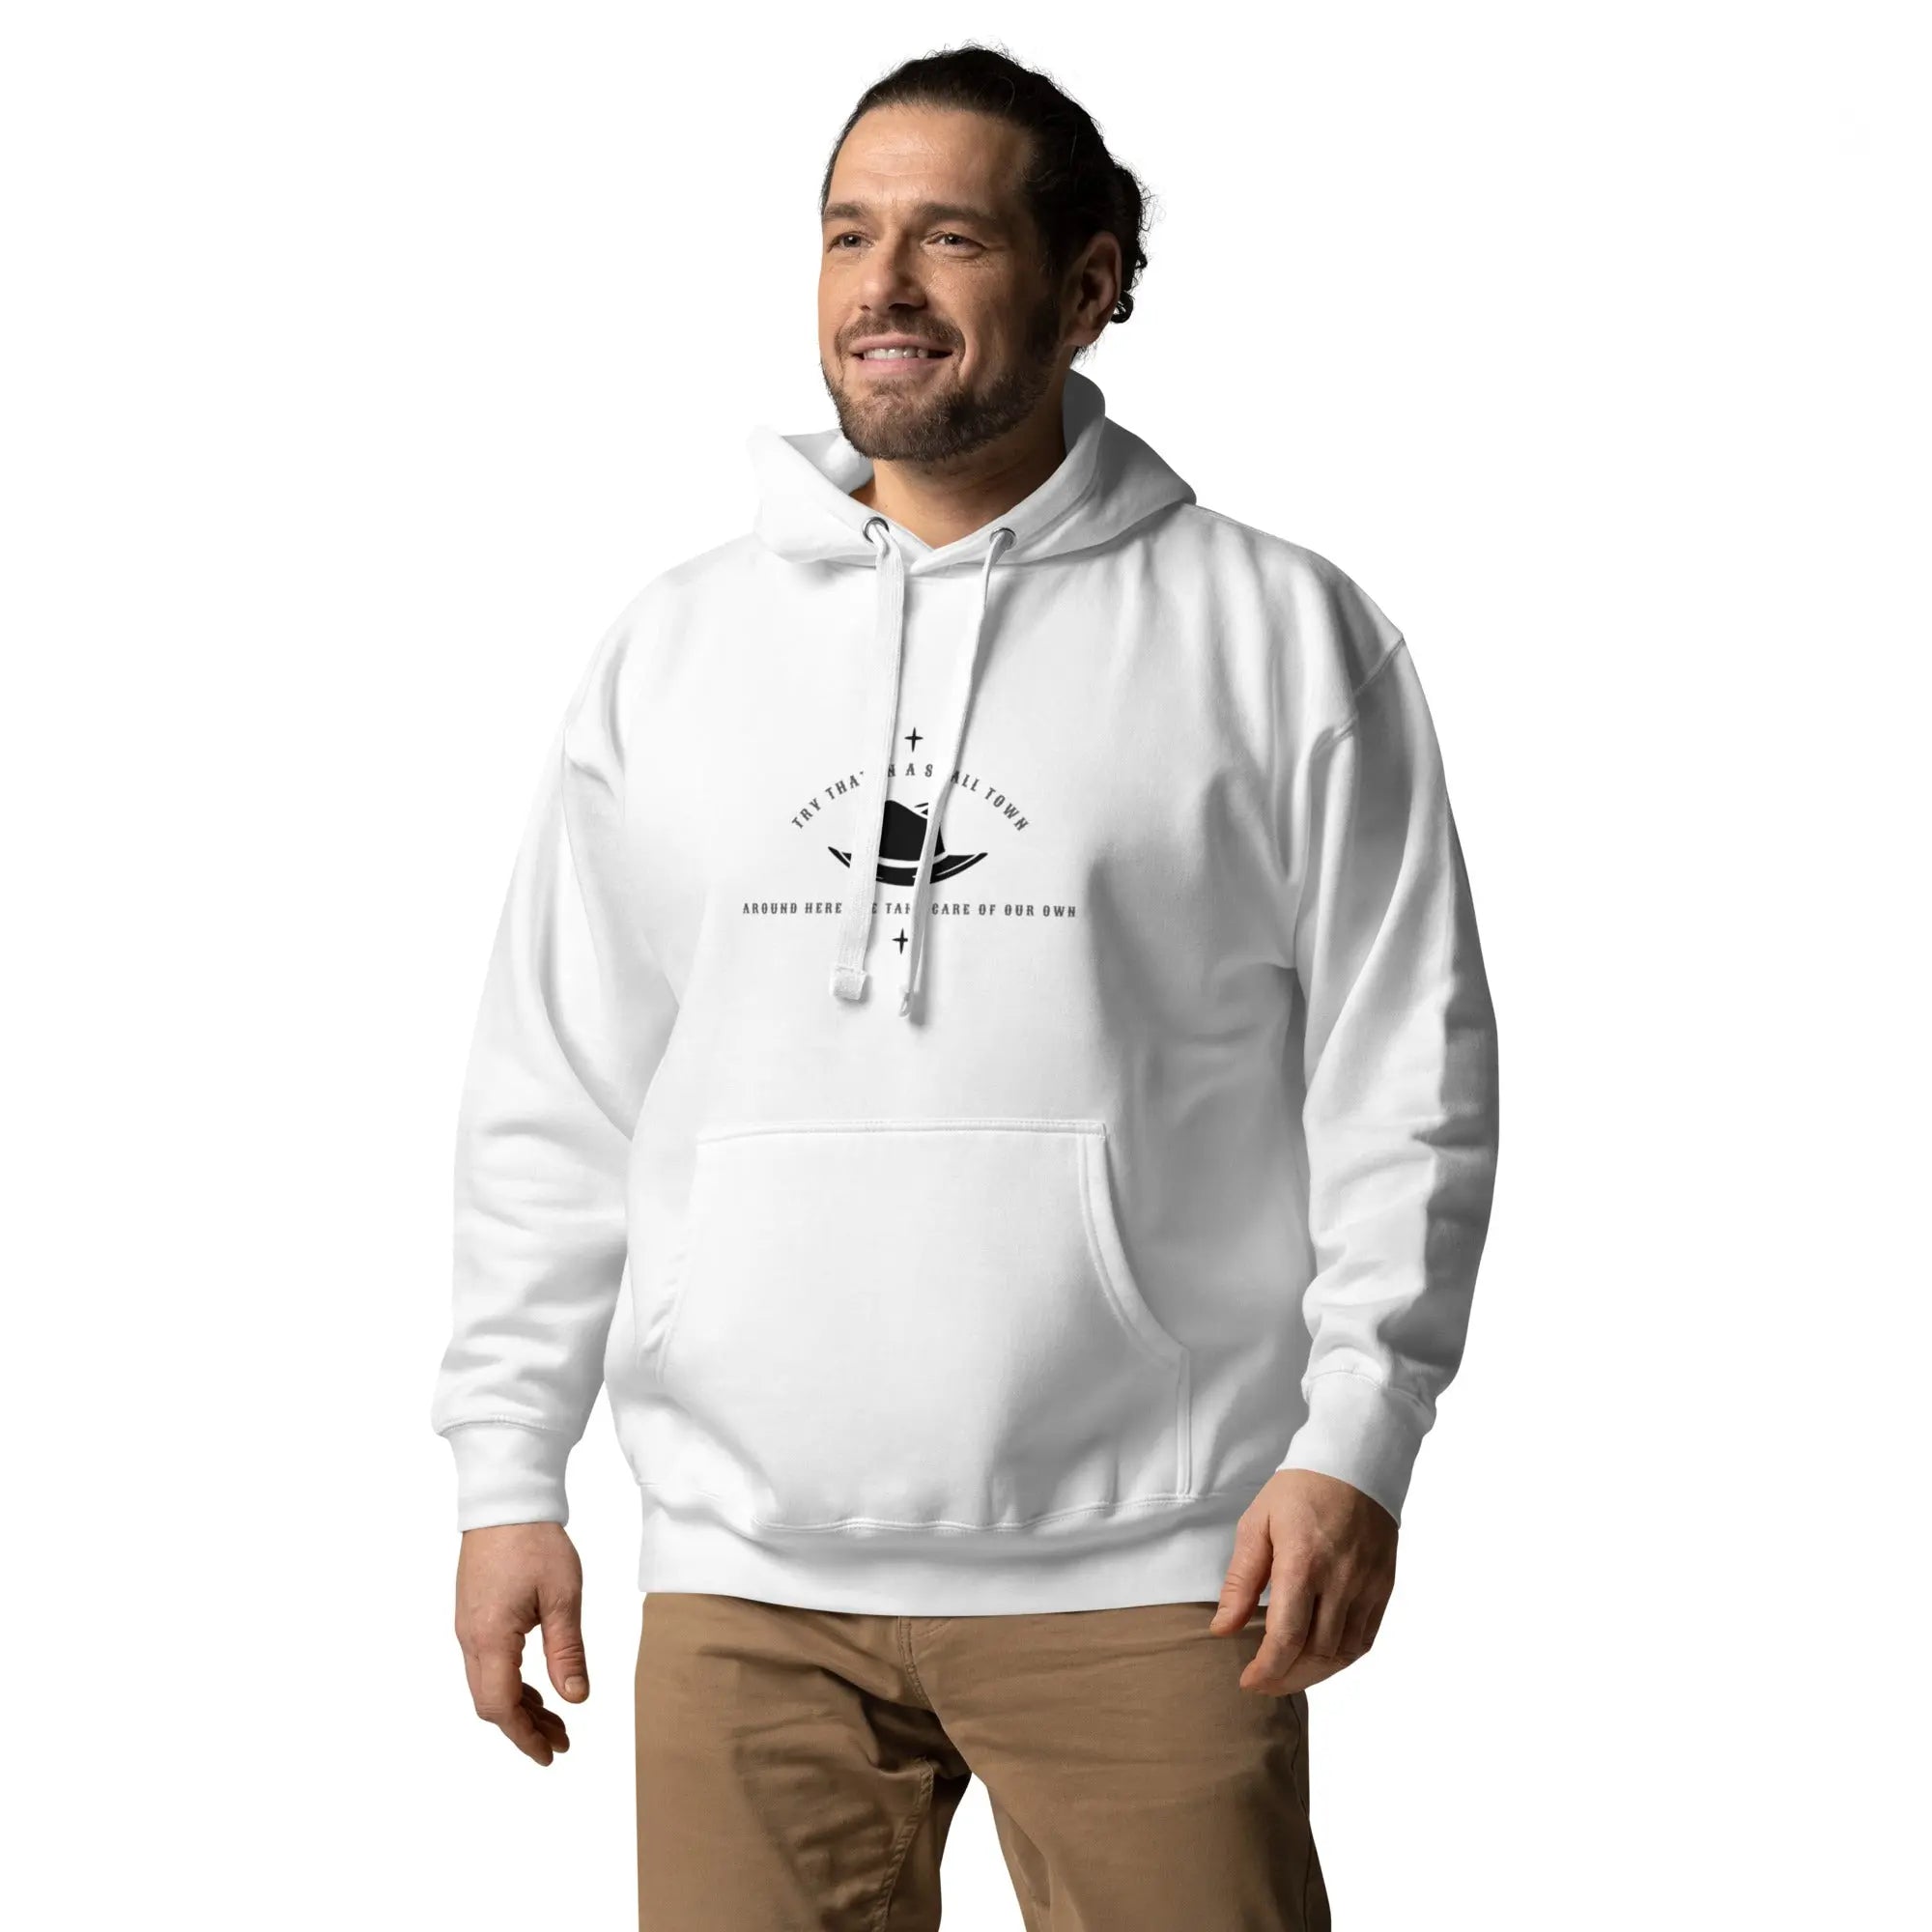 Small Town Boy Hoodie - Image #2